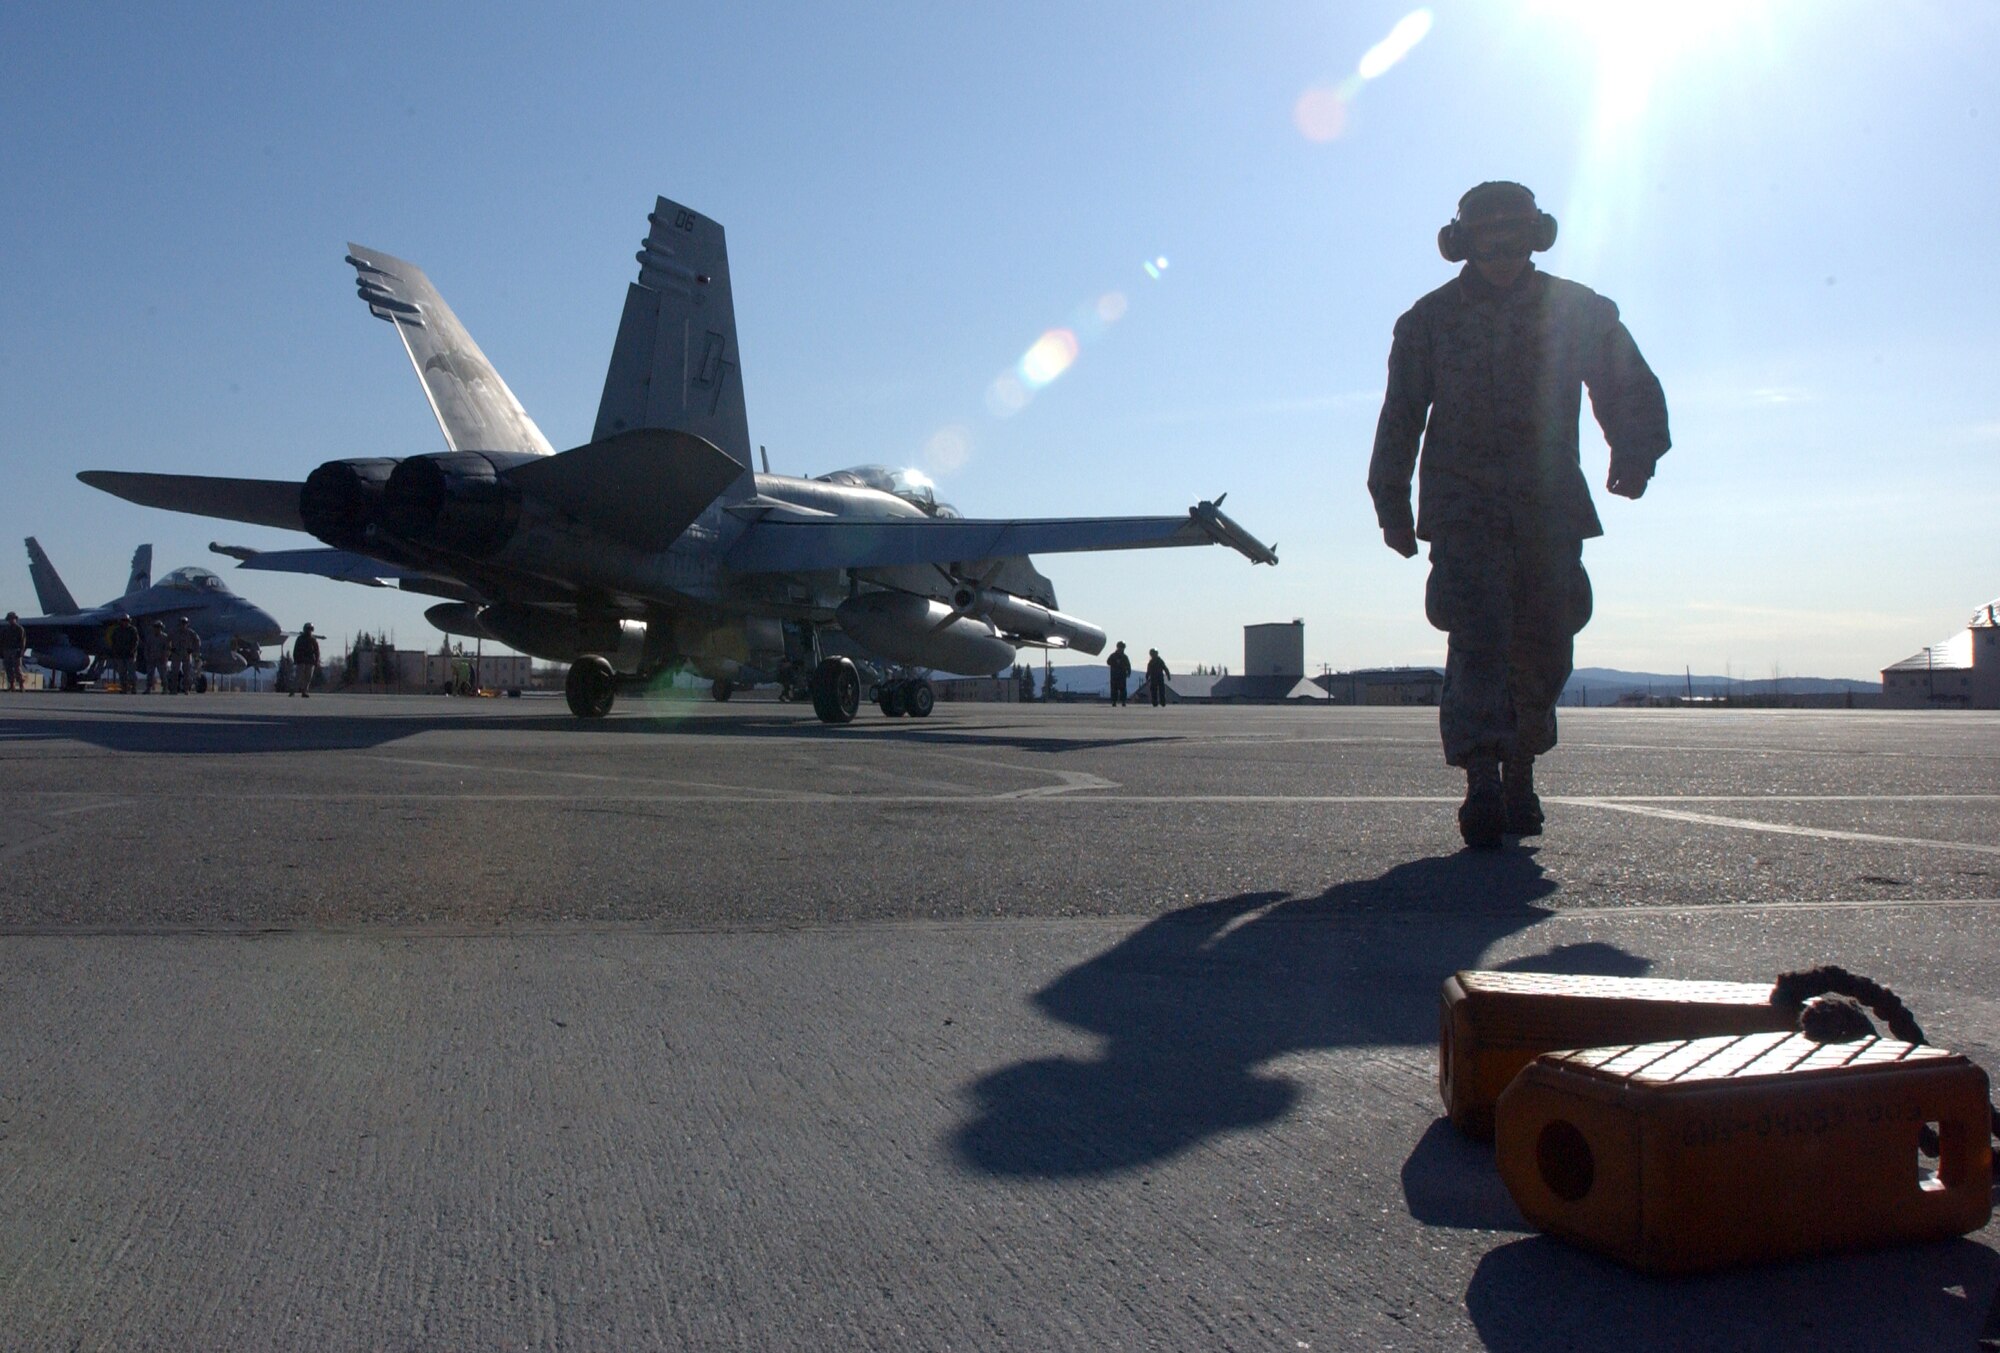 EIELSON AIR FORCE BASE, Alaska --  Lance Cpl. Joseph Trent, a plane captain with Marine Attack Squadron 242, walks away after launching an F/A-18 on a training mission during Northern Edge ‘08 at Eielson AFB near Fairbanks, Alaska. VMFA (AW) 242 traveled from Iwakuni, Japan, to participate in the two-week joint training exercise. Photo by Marine Sgt. Rocky Smith